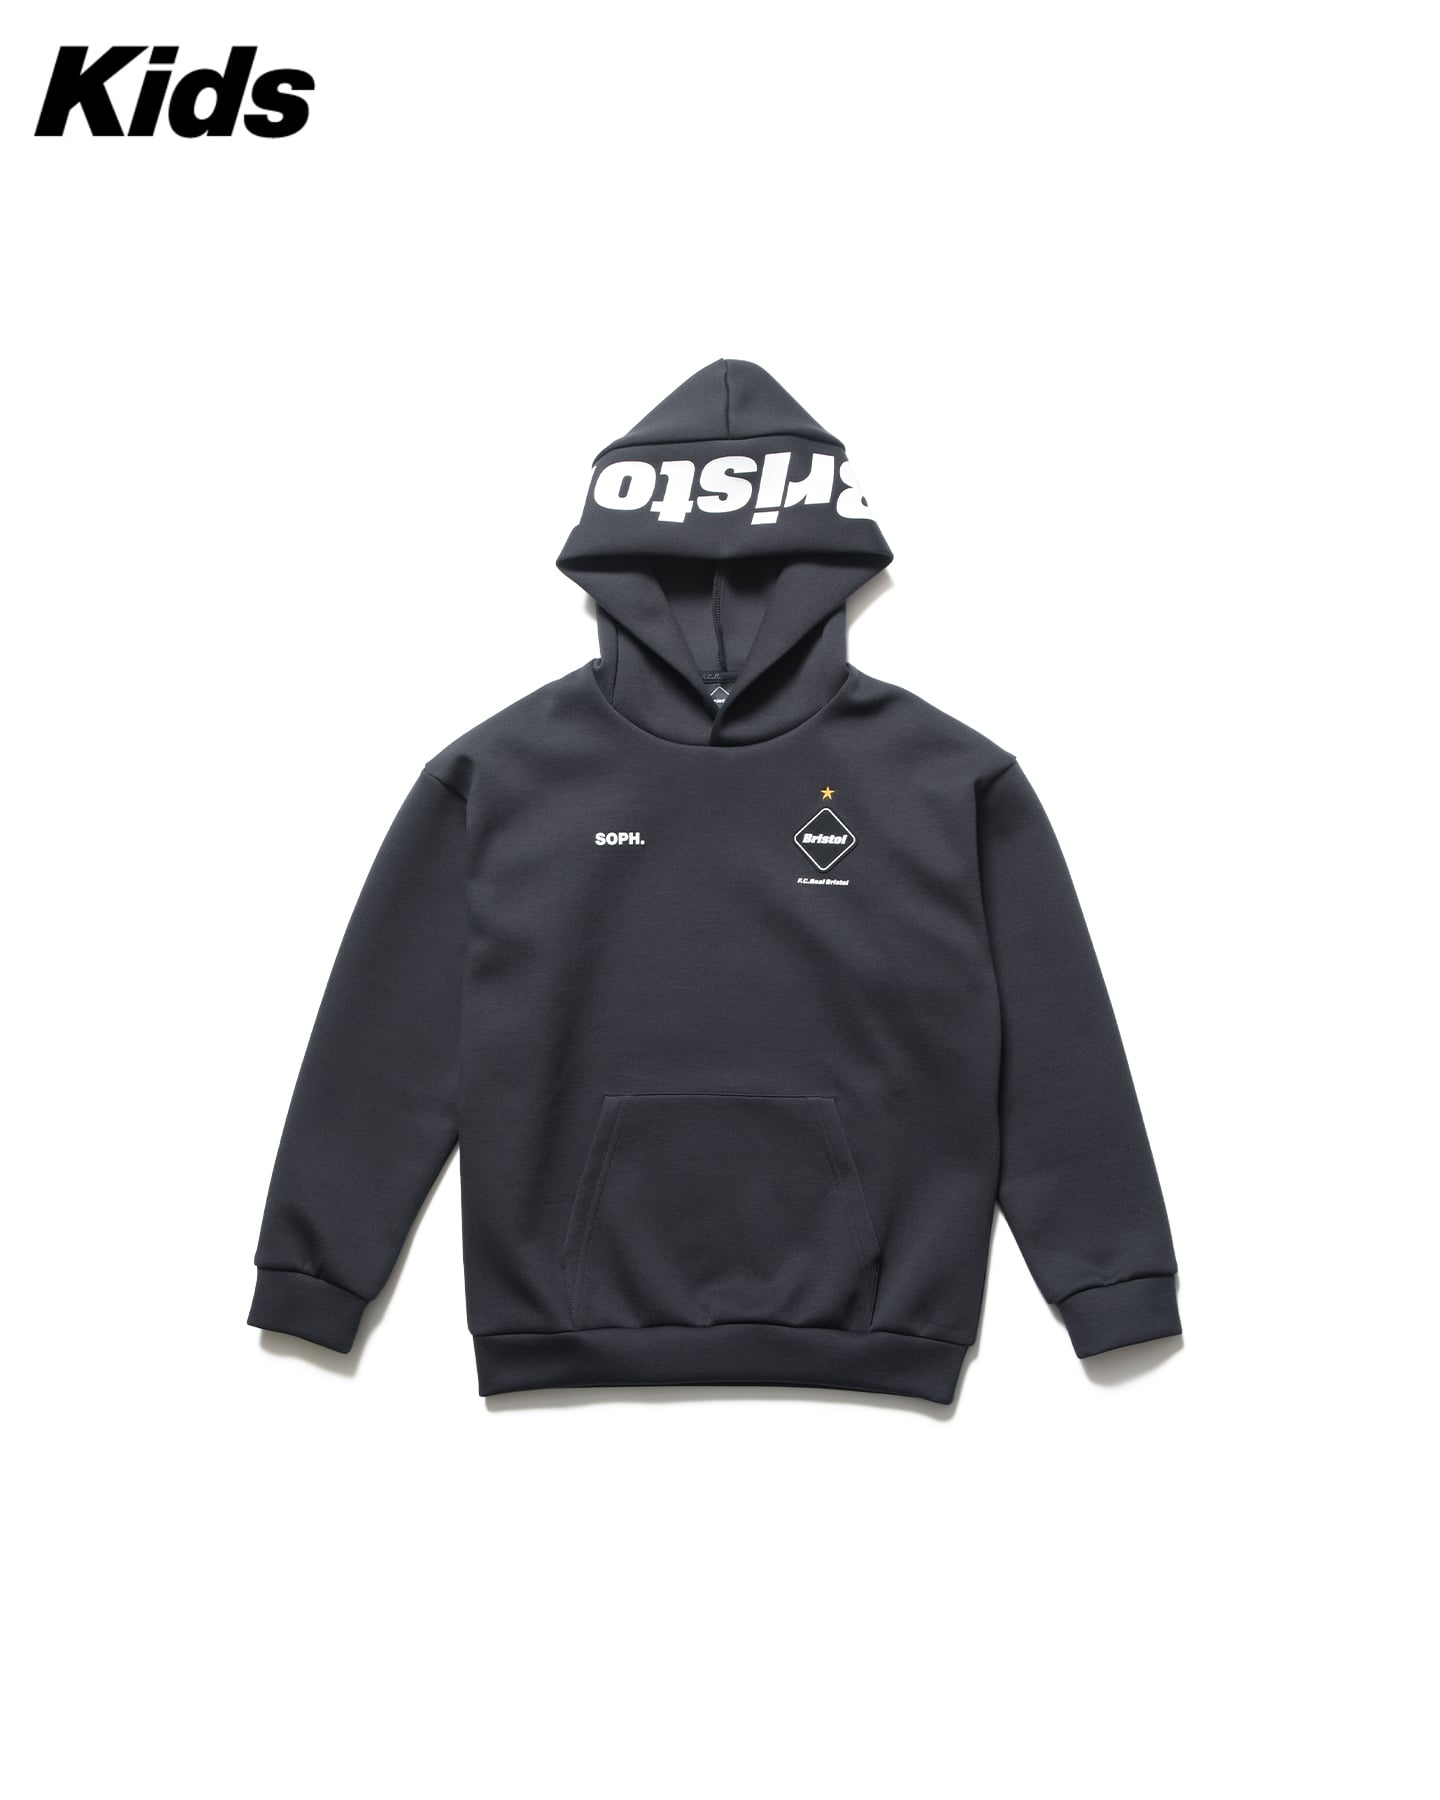 FCRB SOPH LOGO PULLOVER SWEAT HOODIE 新品